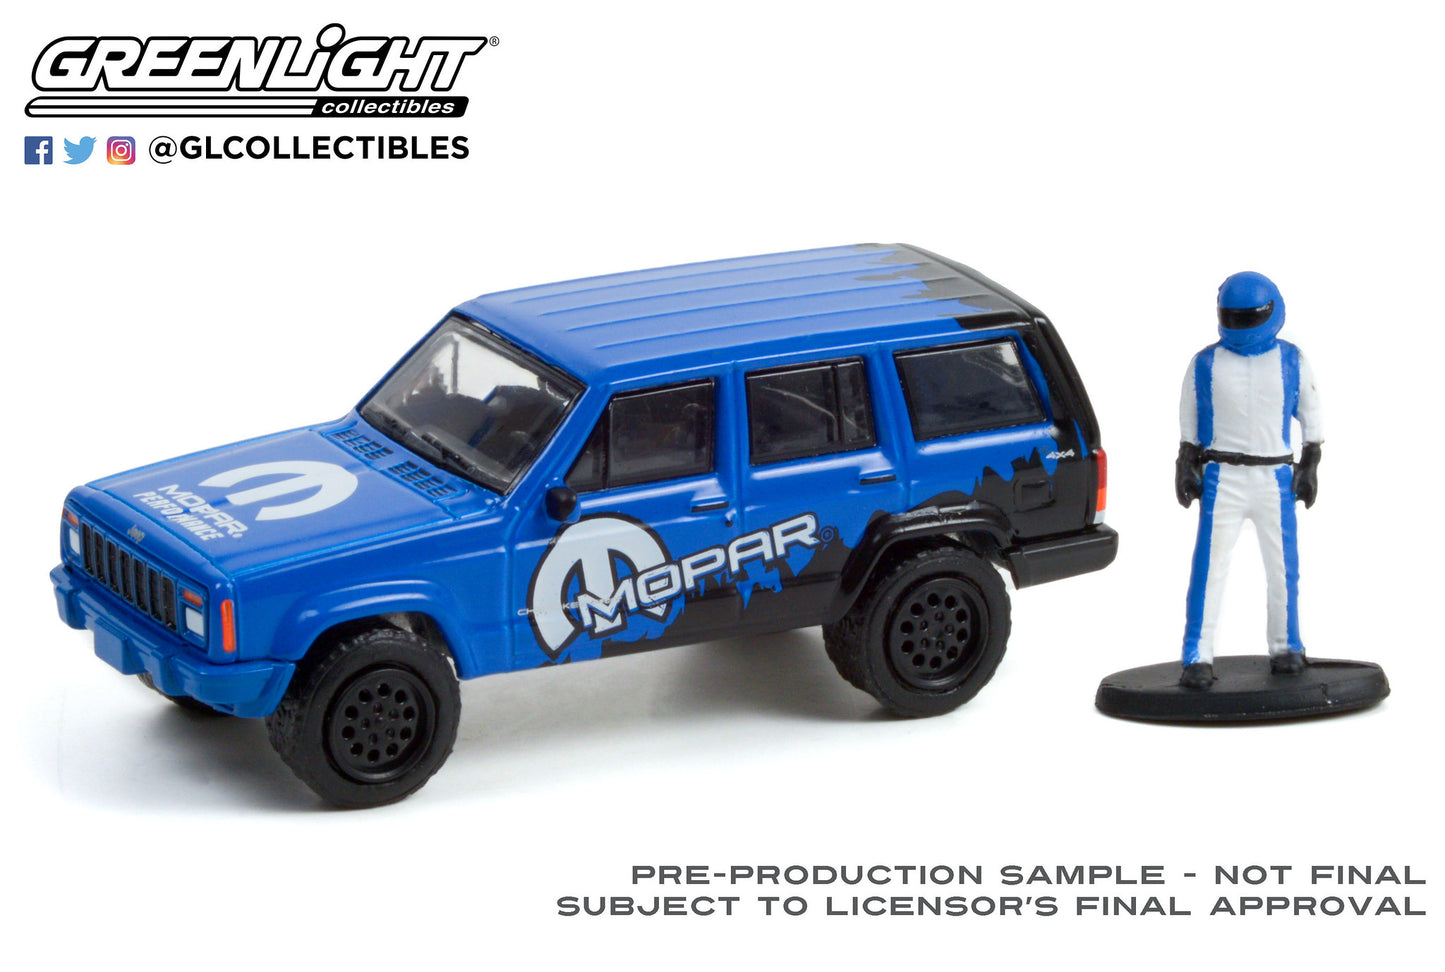 GreenLight 1:64 The Hobby Shop Series 12 - 2001 Jeep Cherokee Sport MOPAR Off-Road with Race Car Driver 97120-E